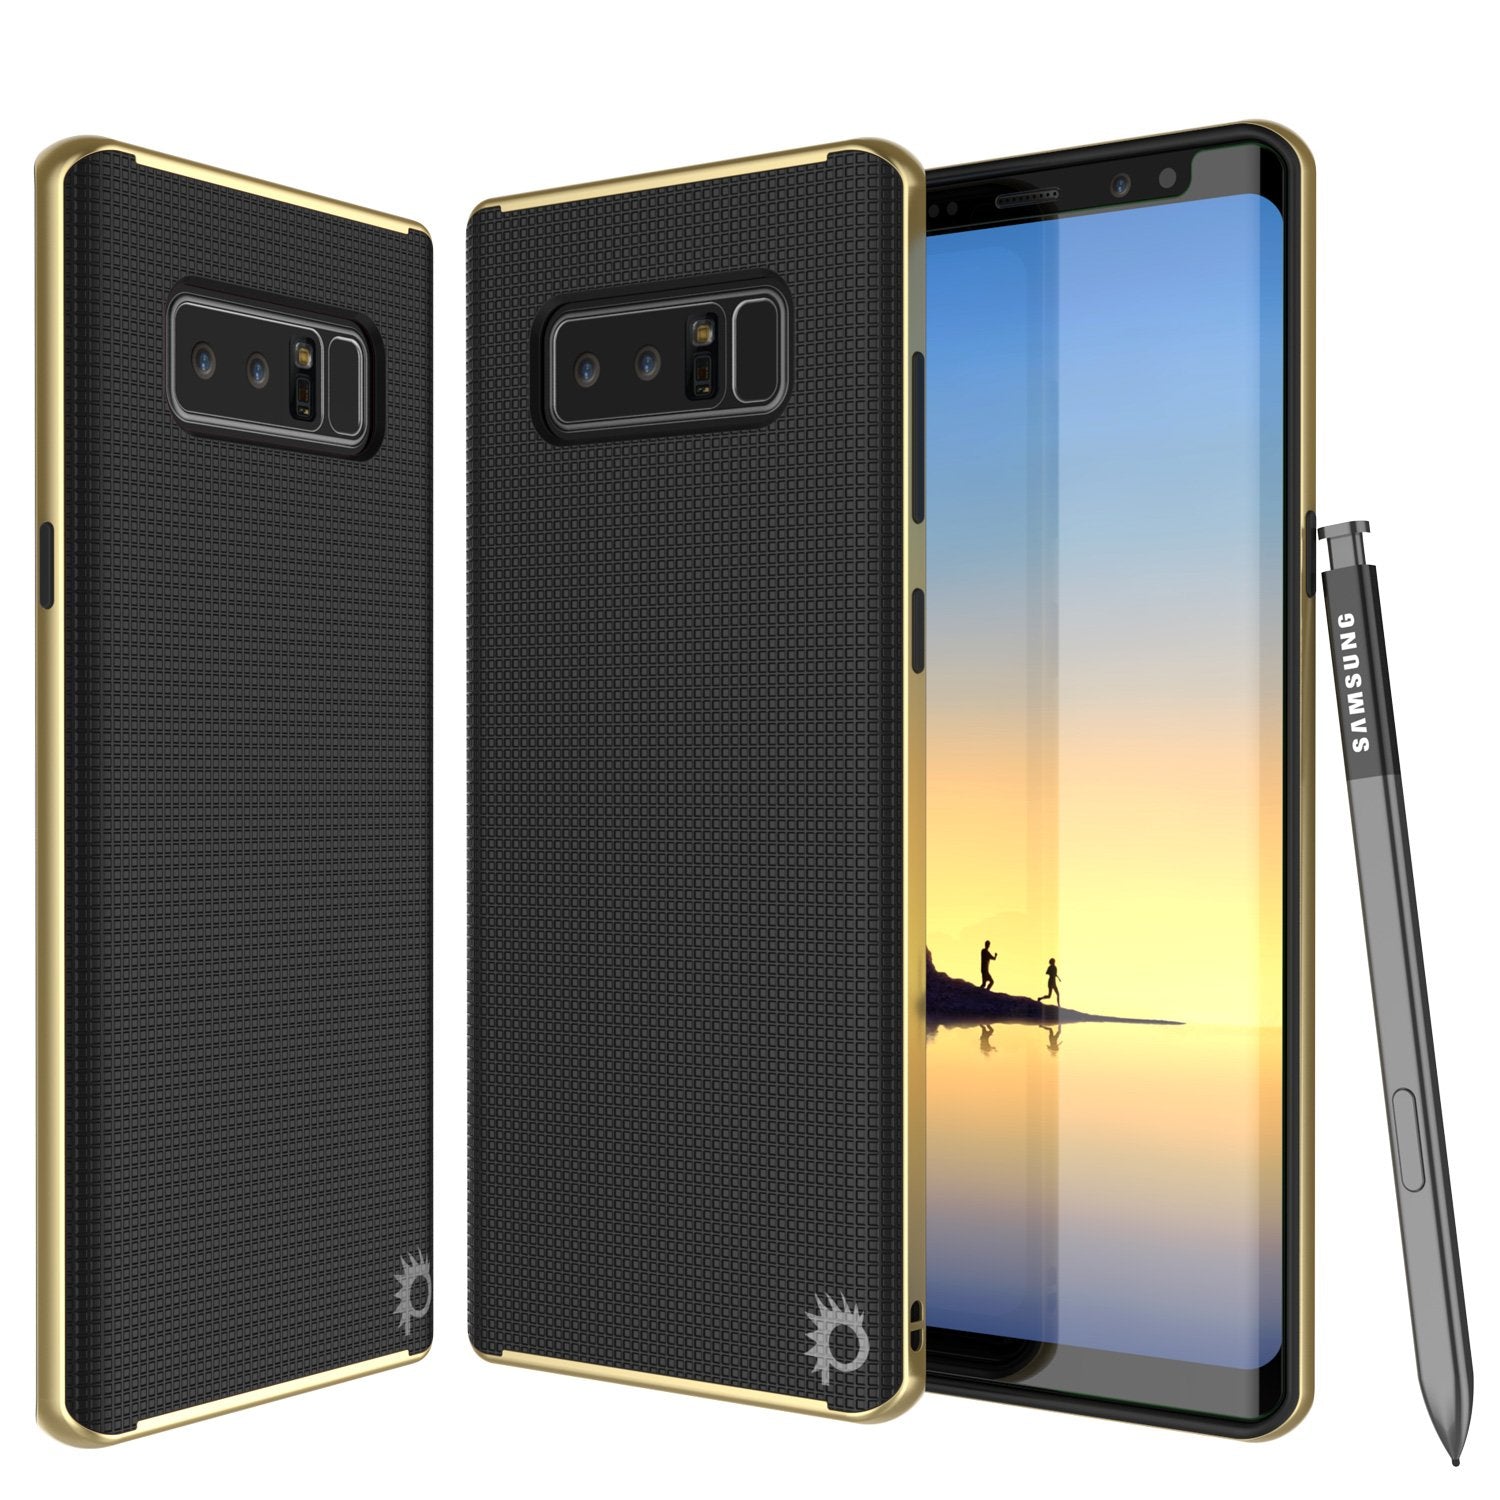 Galaxy Note 8 Case, PunkCase [Stealth Series] Hybrid 3-Piece Shockproof Dual Layer Cover [Non-Slip] [Soft TPU + PC Bumper] with PUNKSHIELD Screen Protector for Samsung Note 8 [Gold]